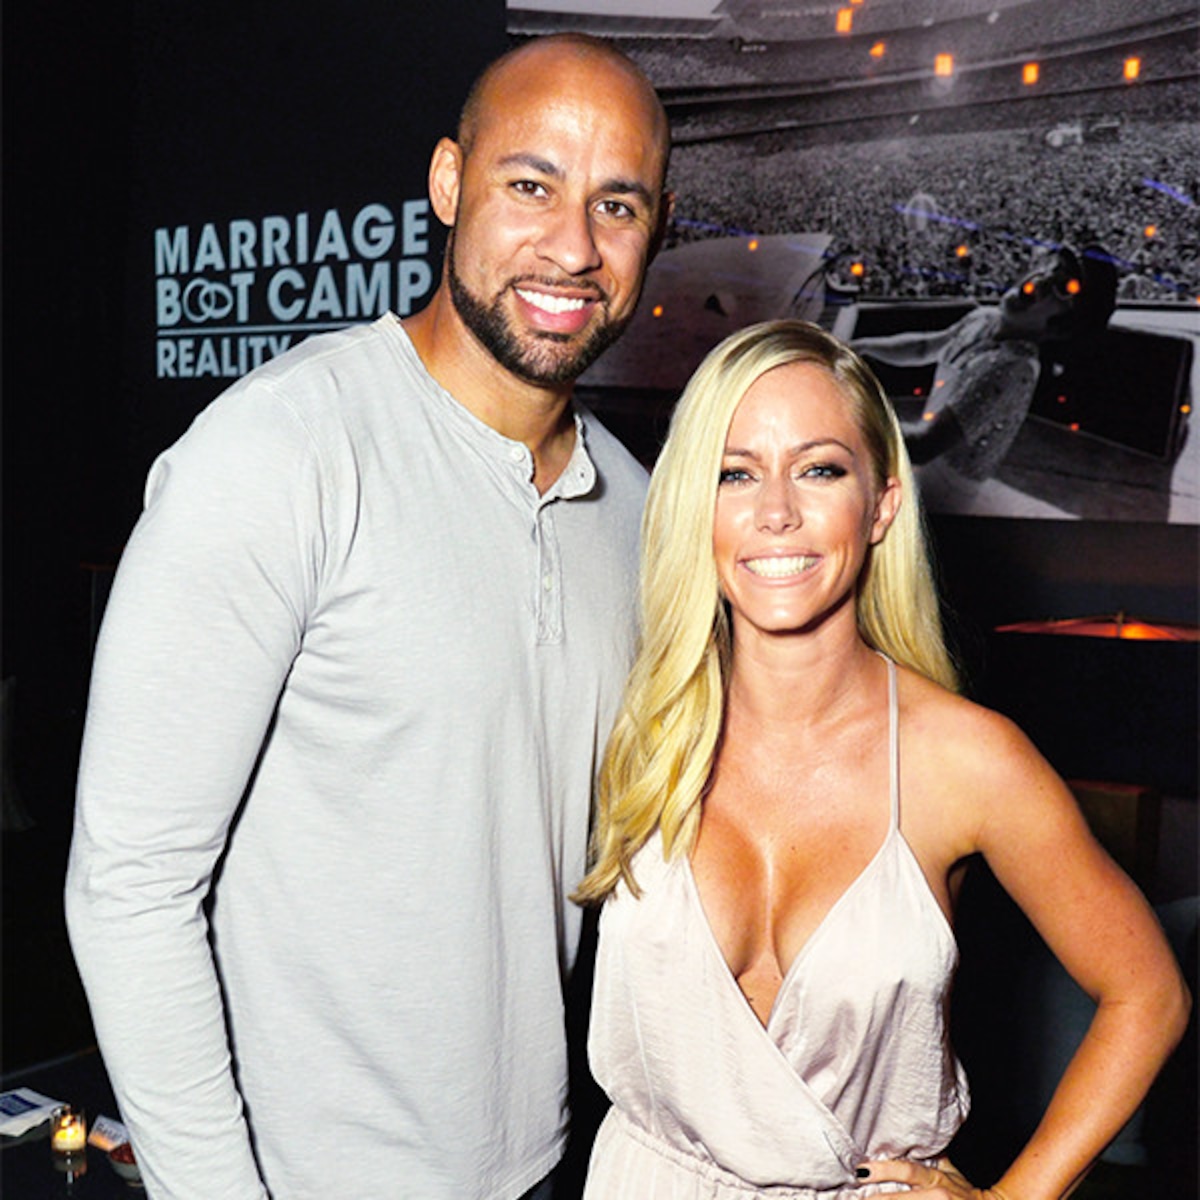 A Timeline of Kendra Wilkinson & Hank Baskett's Ups and Downs - E! Online